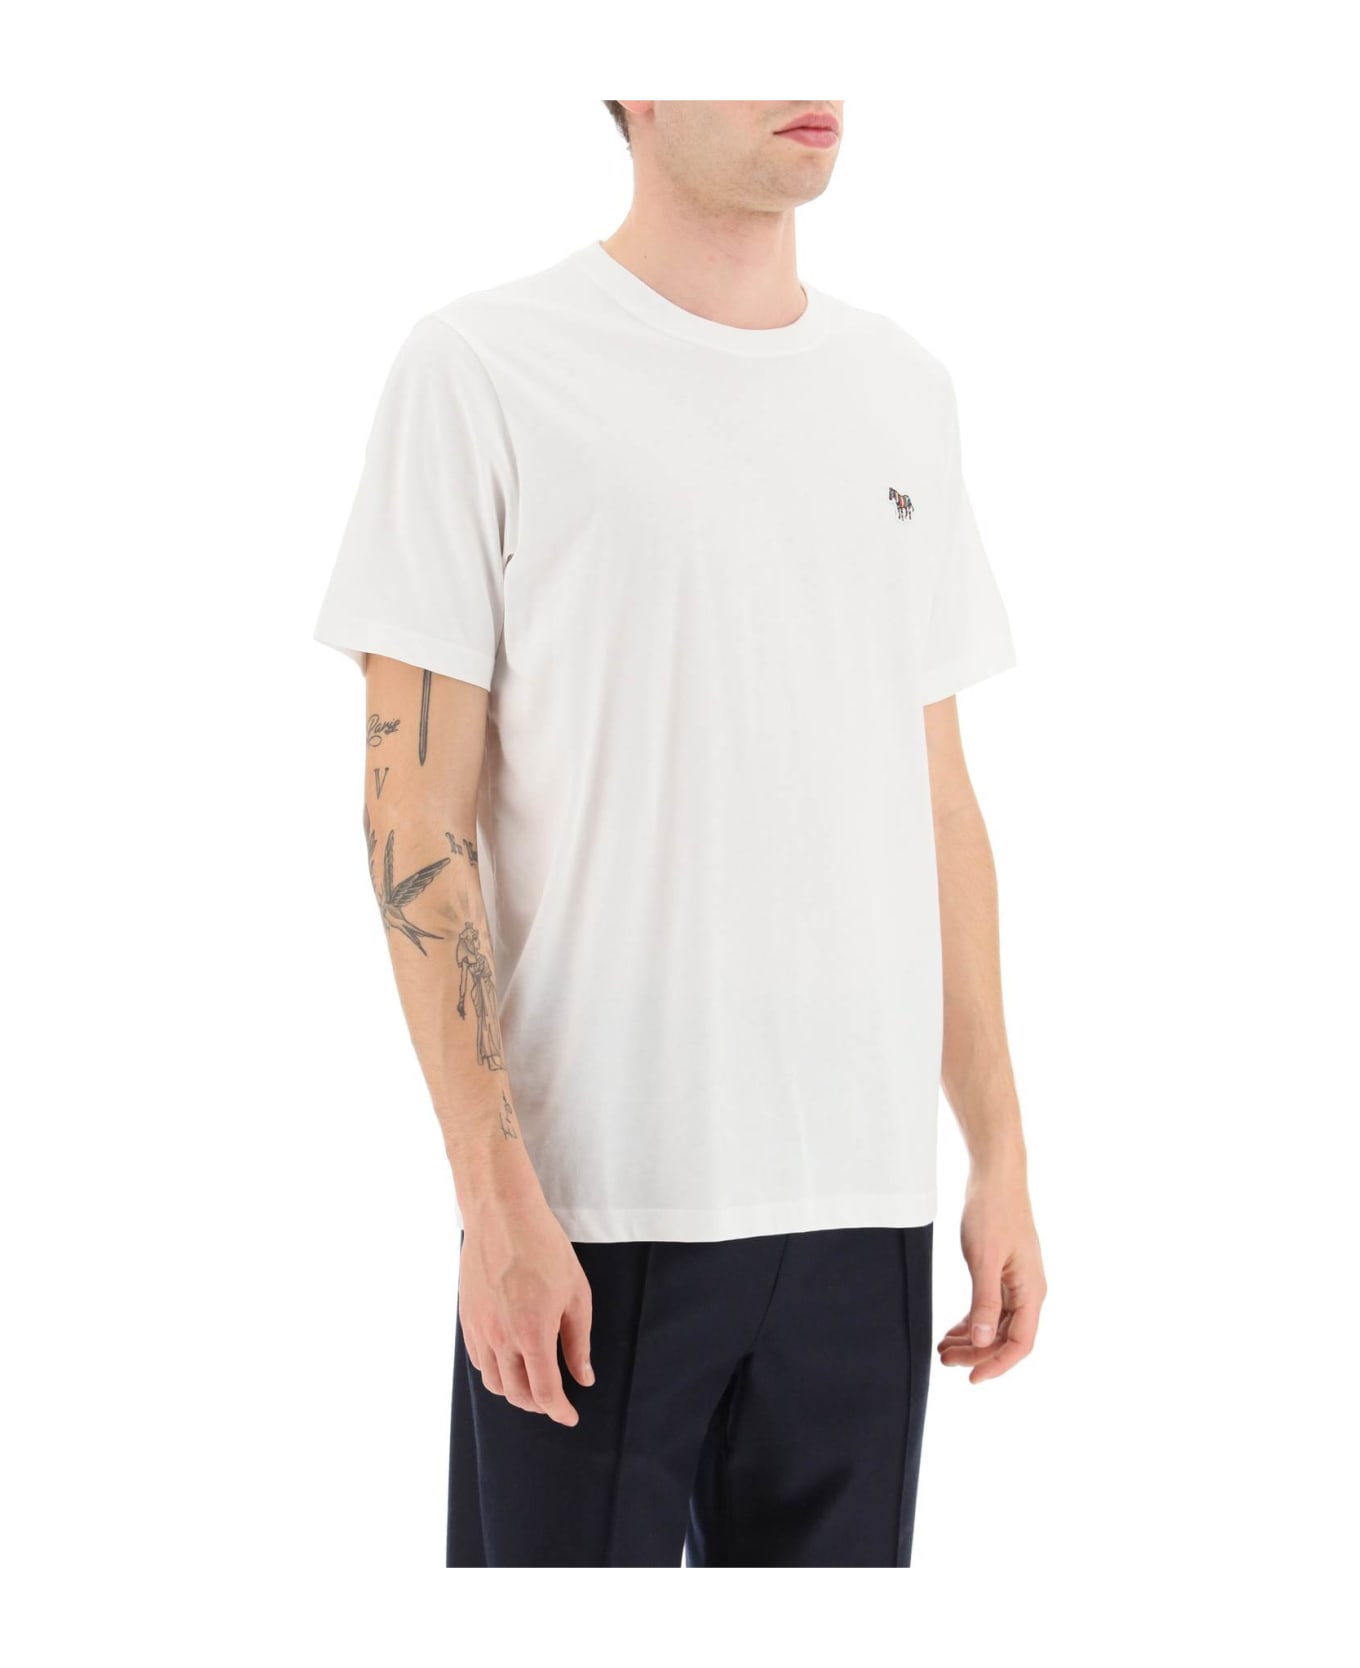 PS by Paul Smith Organic Cotton T-shirt - White シャツ